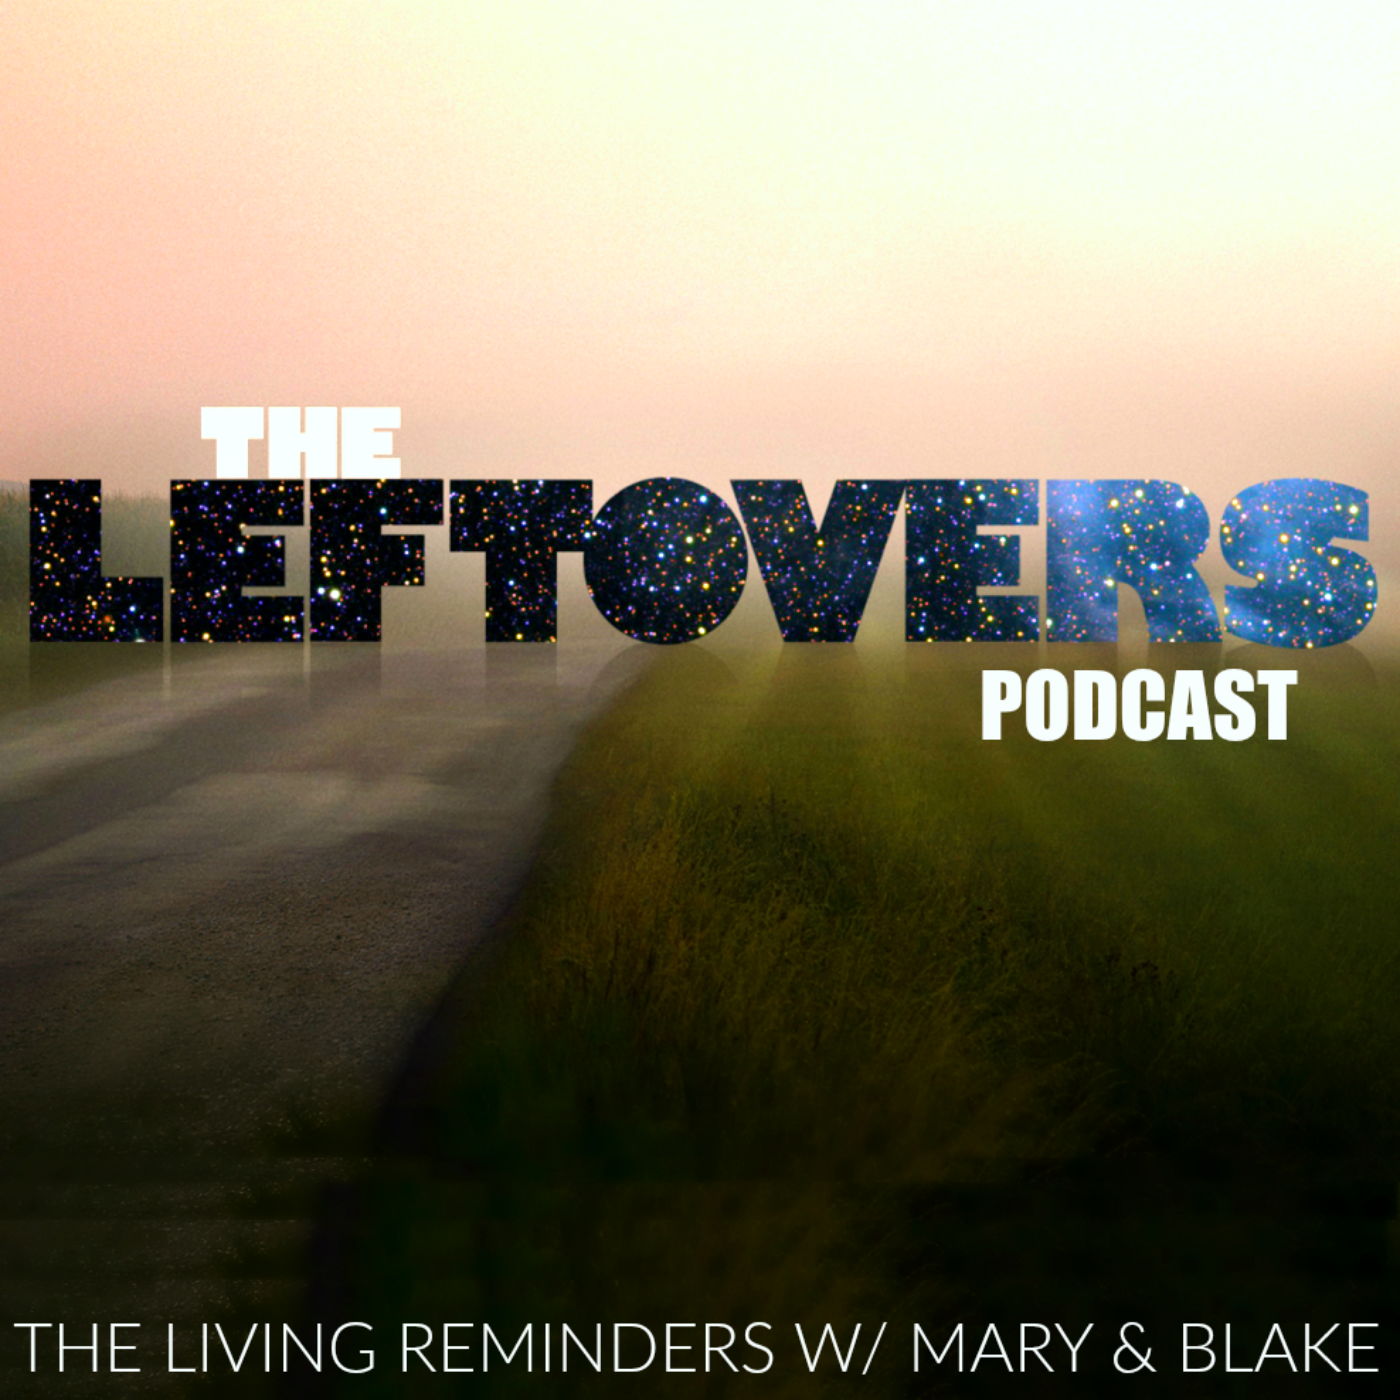 The Leftovers Podcast